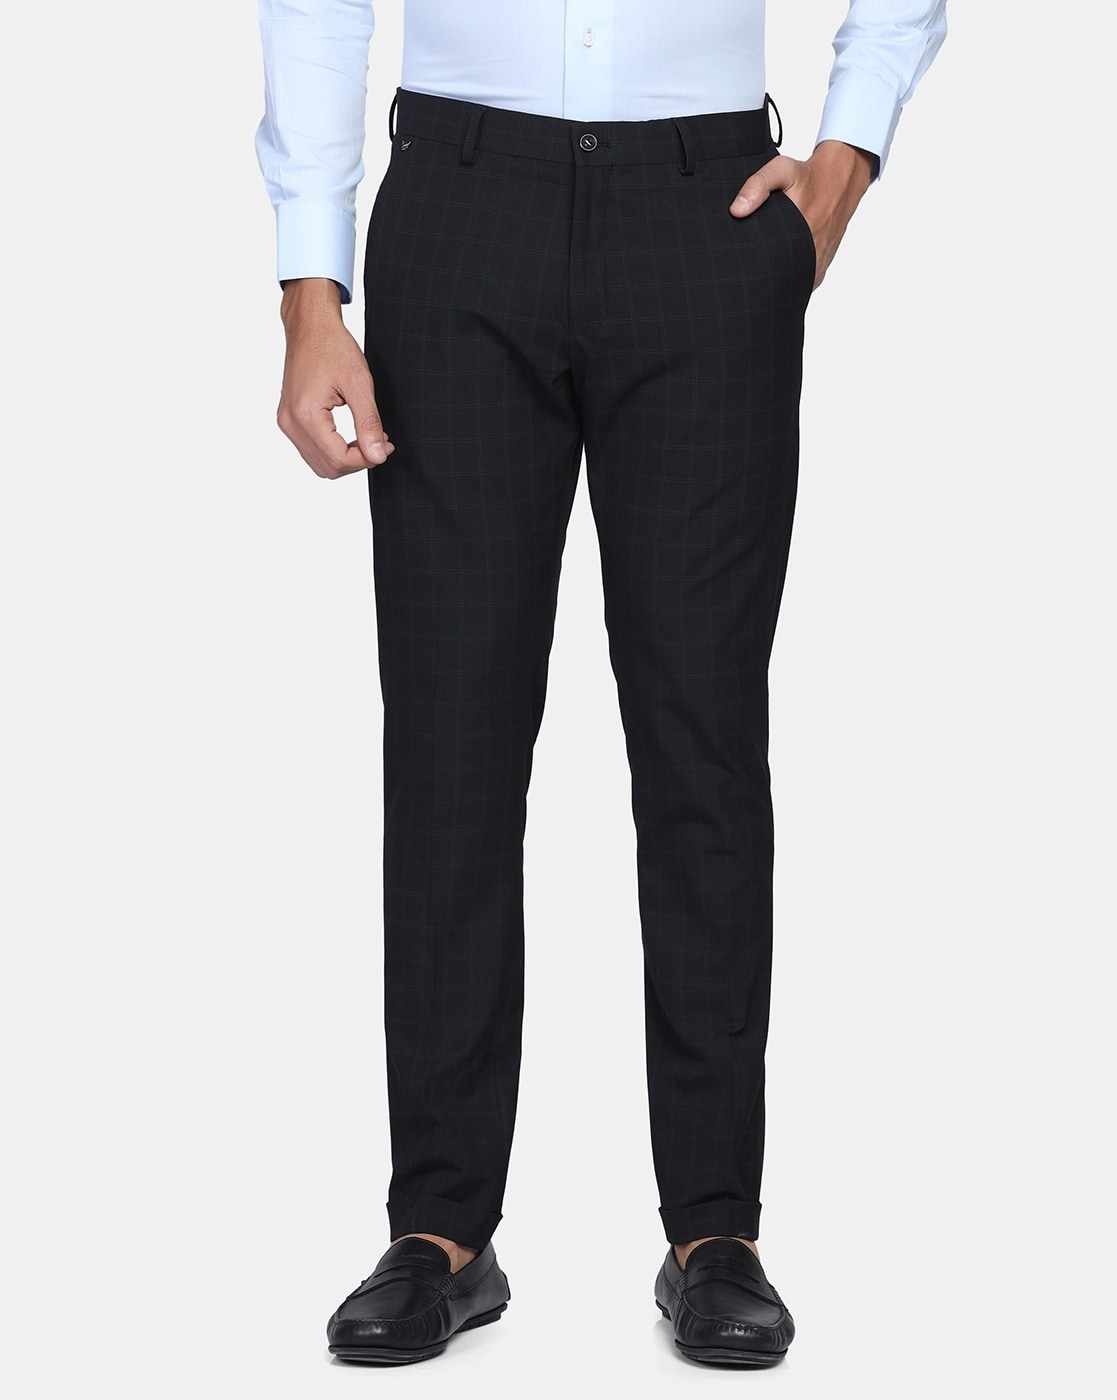 Textured Formal Trousers In Grey B91 Beck